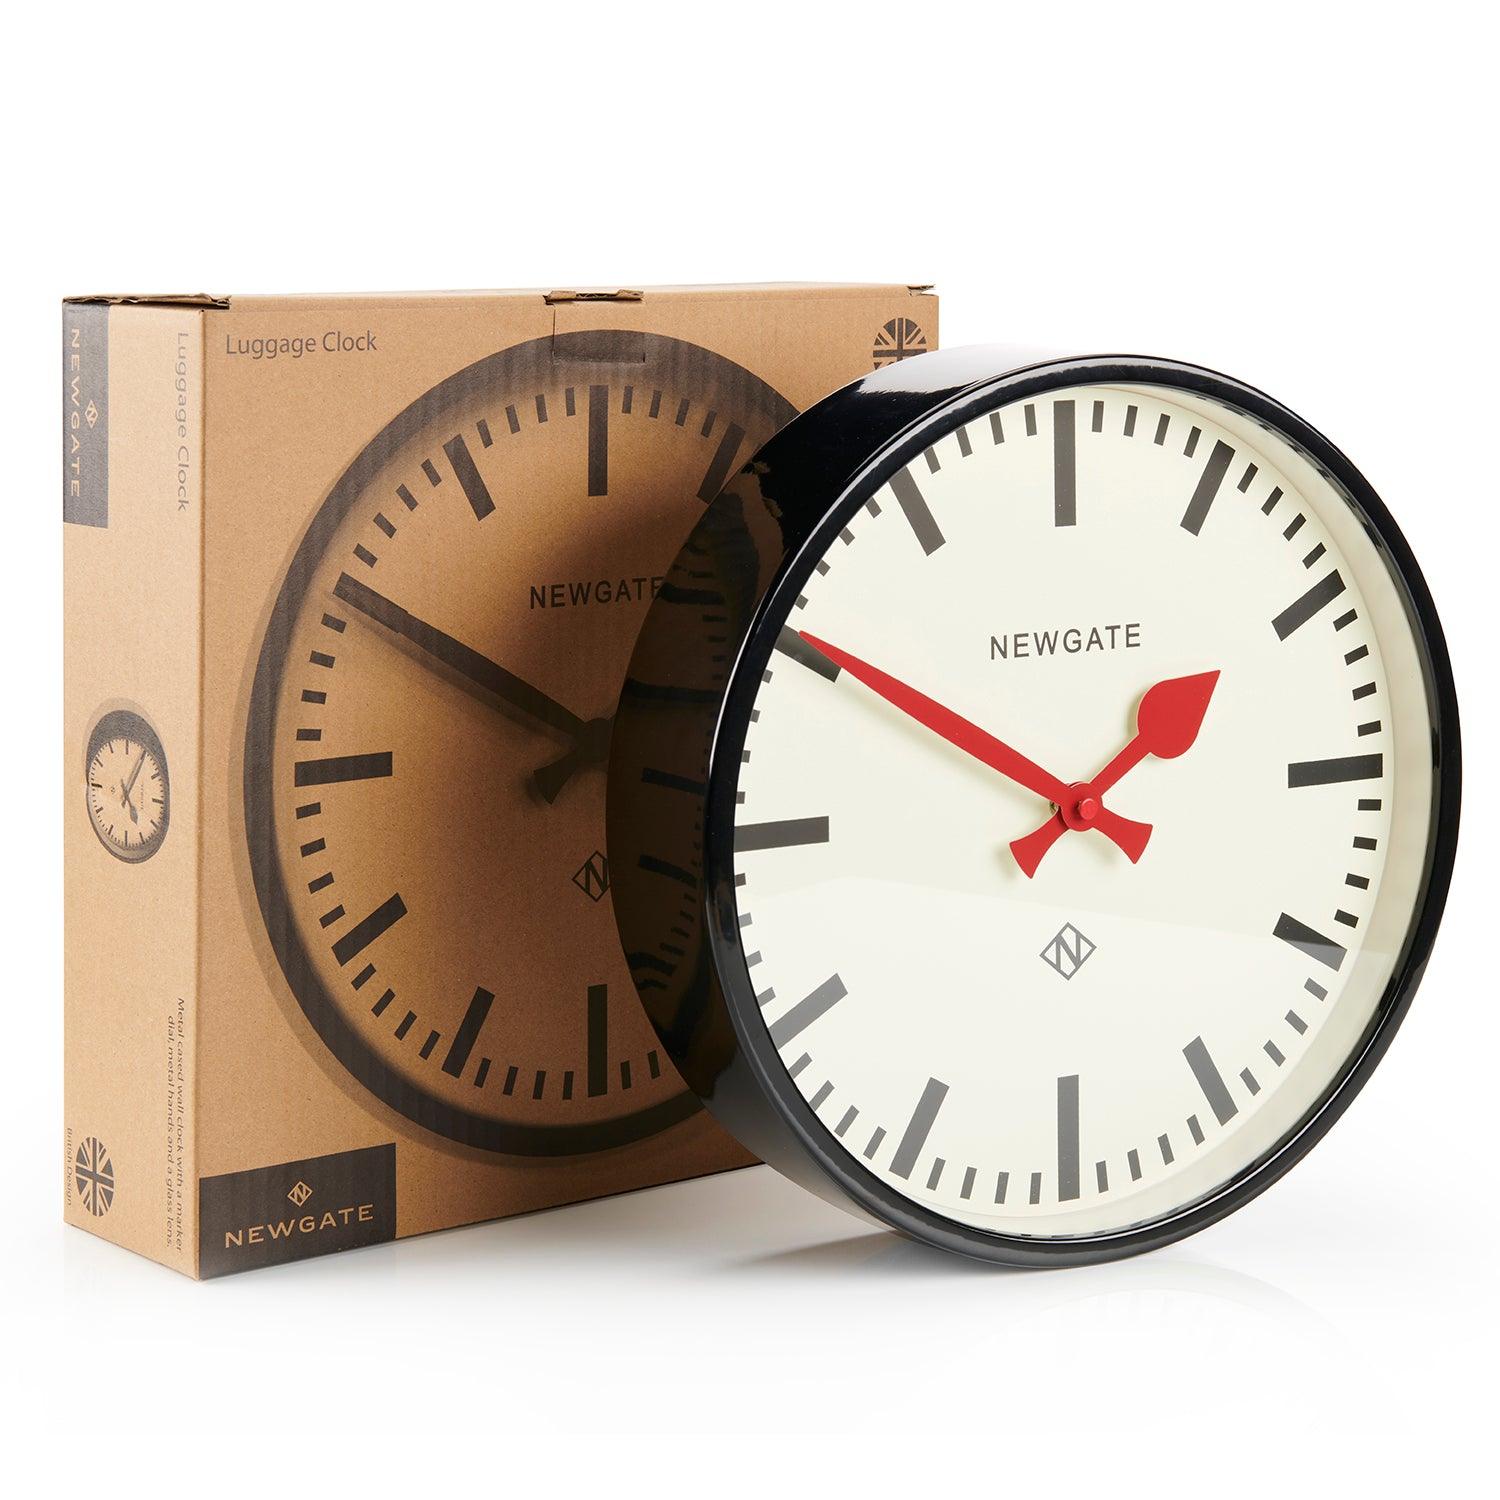 Black Round Railway Clock With Red Hands - Clocks/Watches - Science Museum Shop